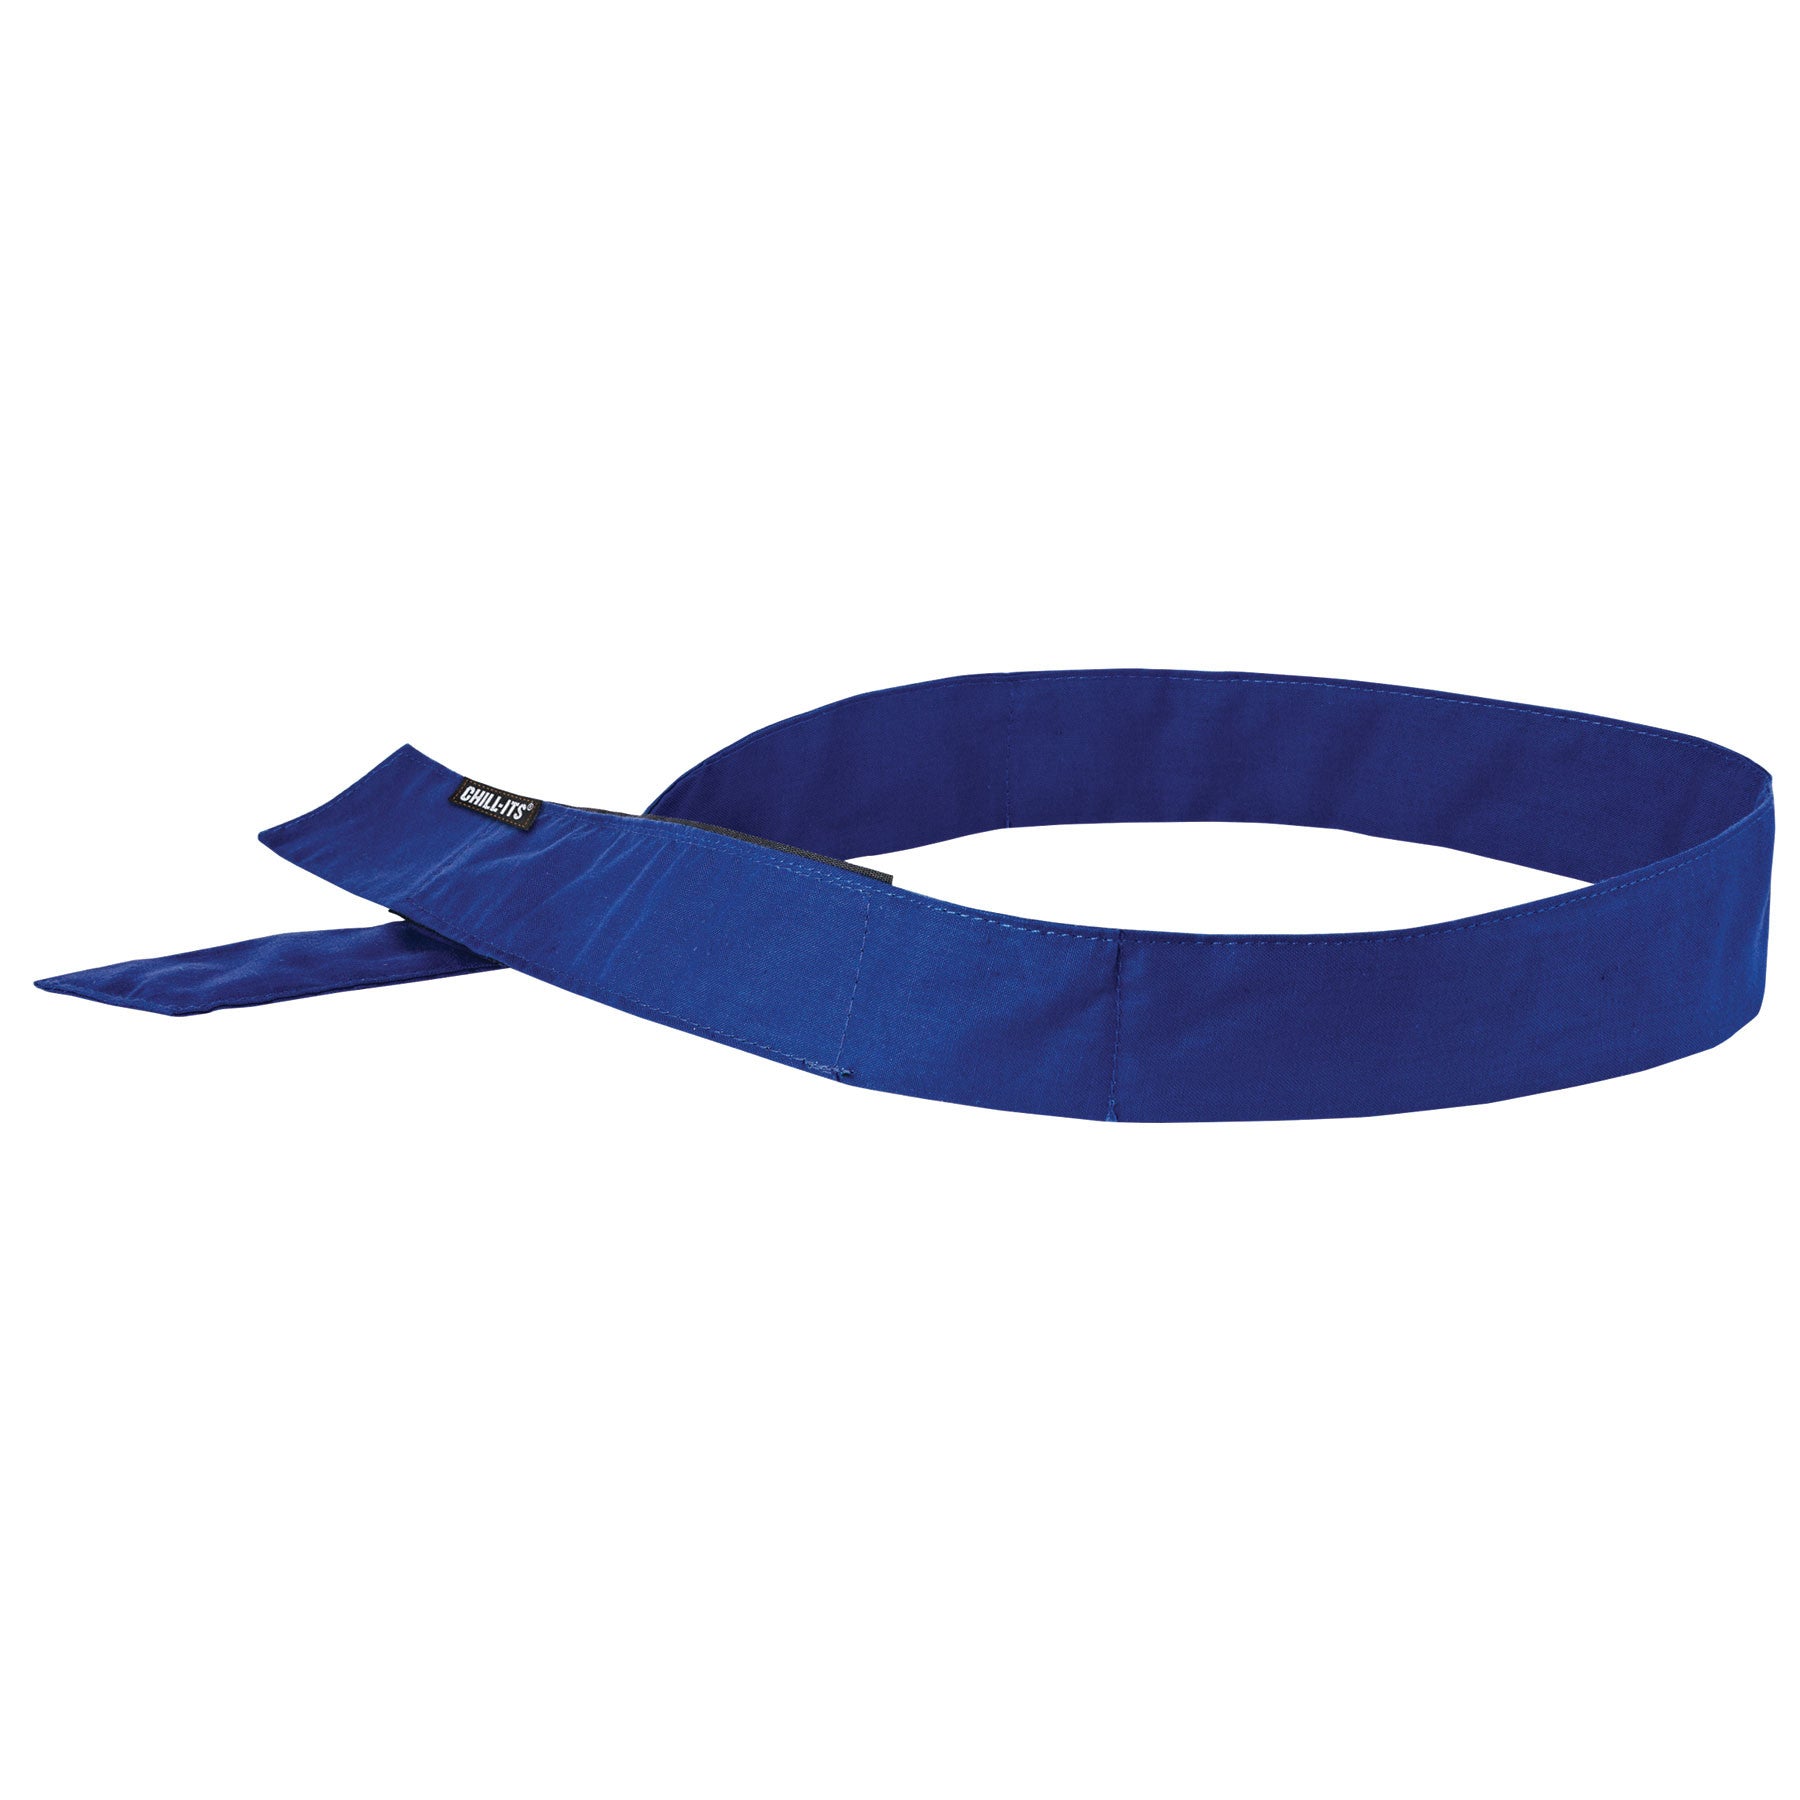 Ergodyne Solid Blue Chill-Its 6705 Lightweight Cotton Evaporative Cooling Bandana/Headband With Hook And Loop Closure-eSafety Supplies, Inc